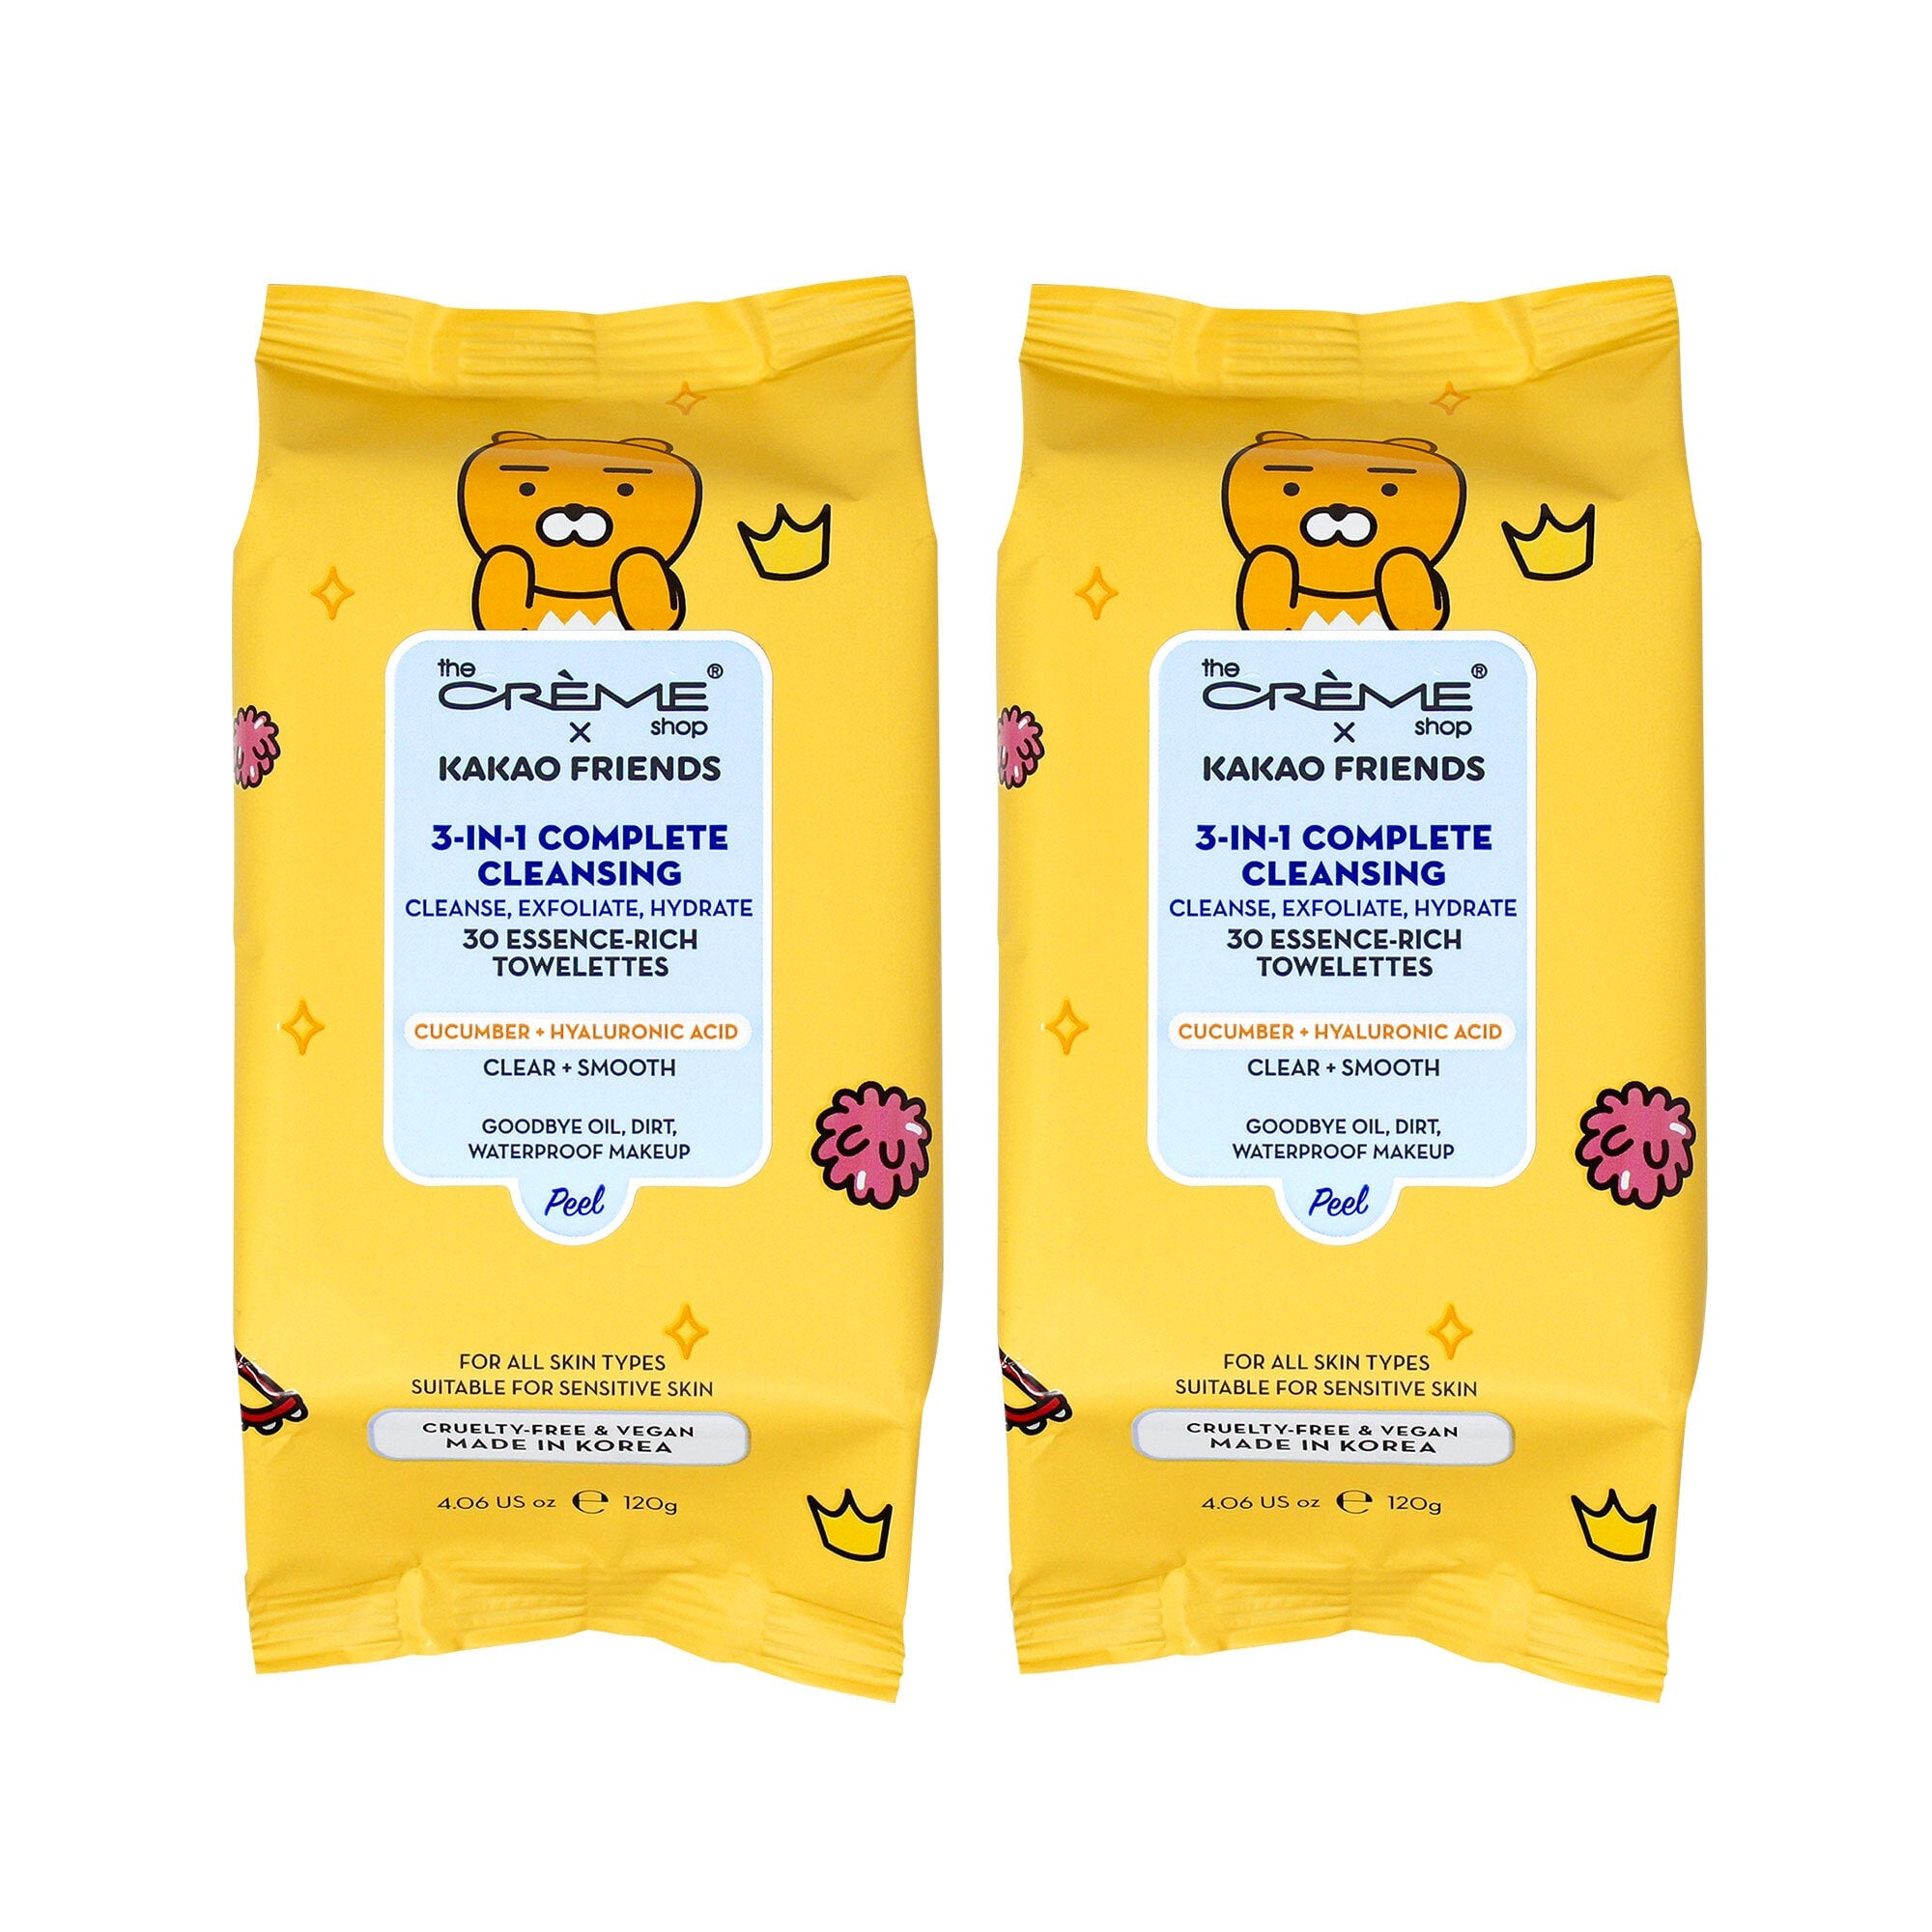 RYAN 3-In-1 Complete Cleansing Towelettes (2 Pack) The Crème Shop 